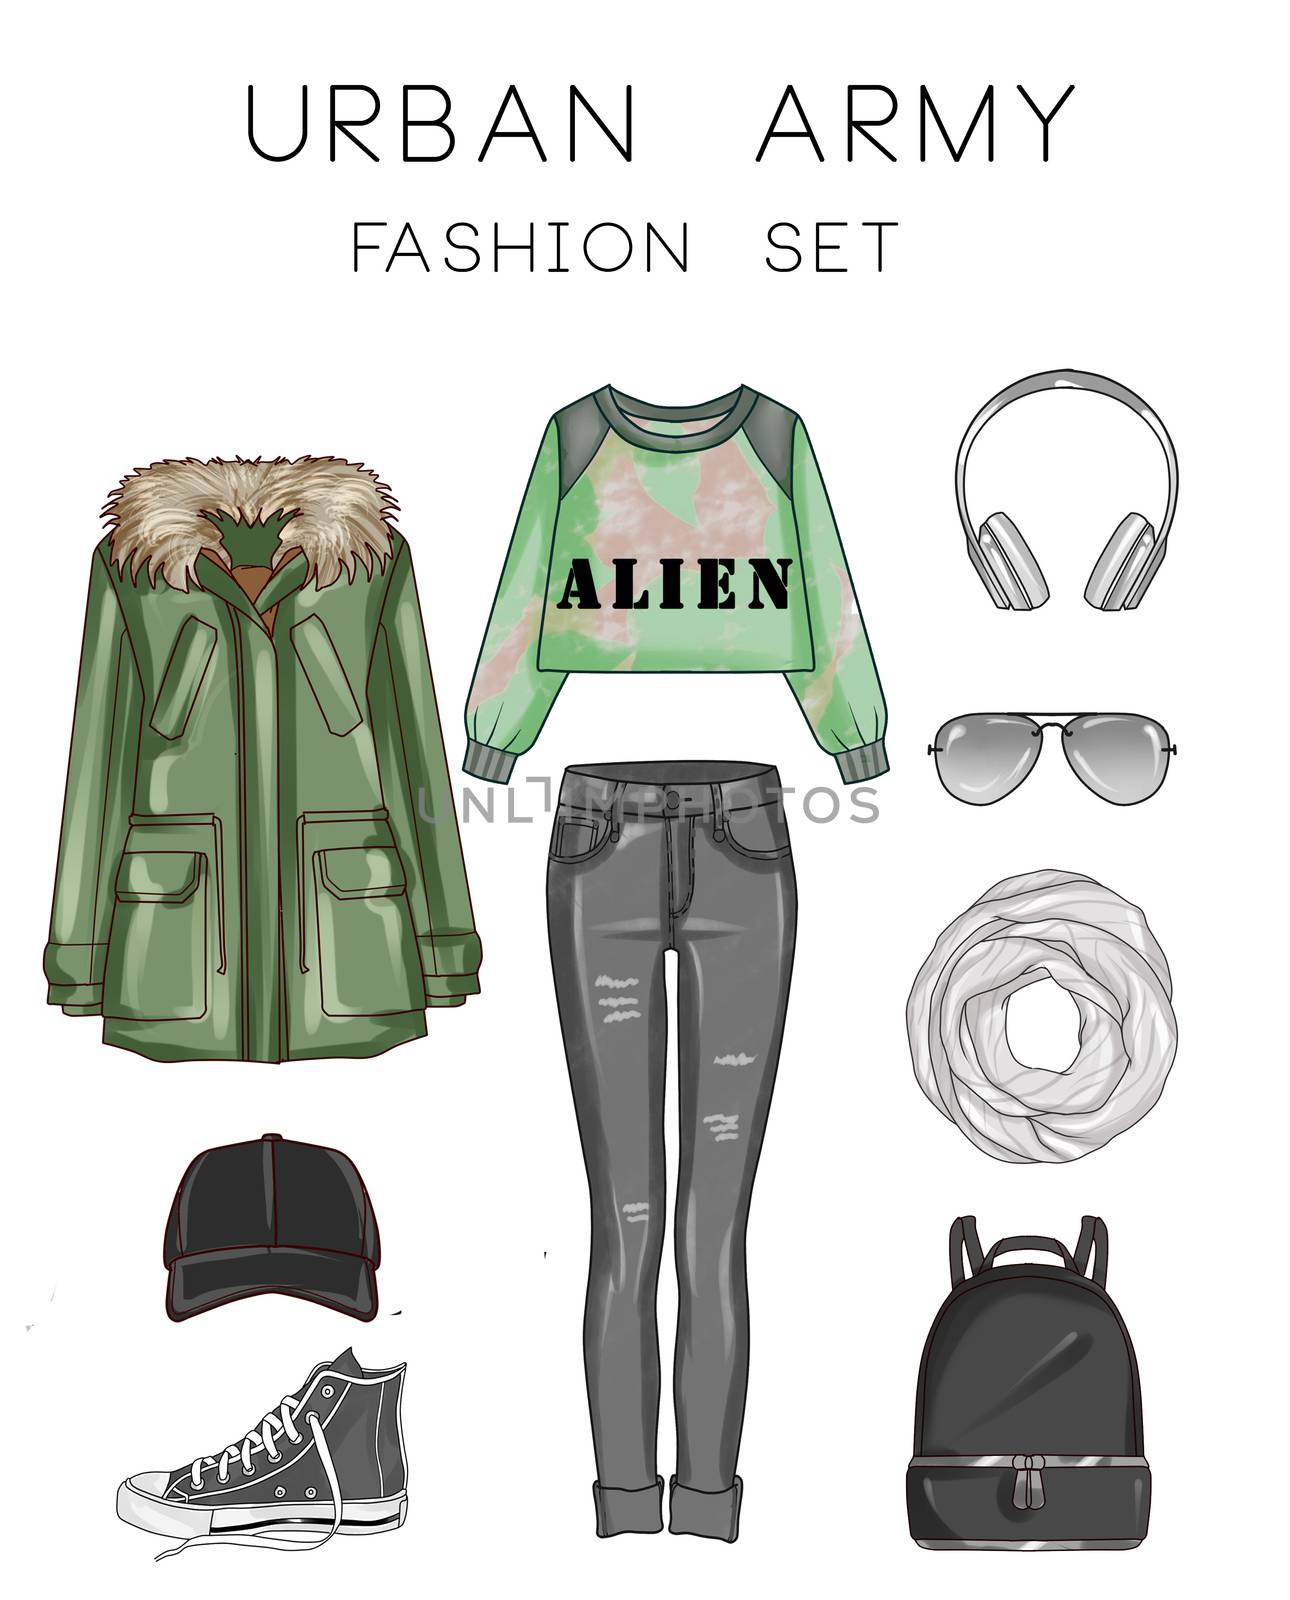 Fashion set of woman's clothes, accessories, and shoes by GGillustrations